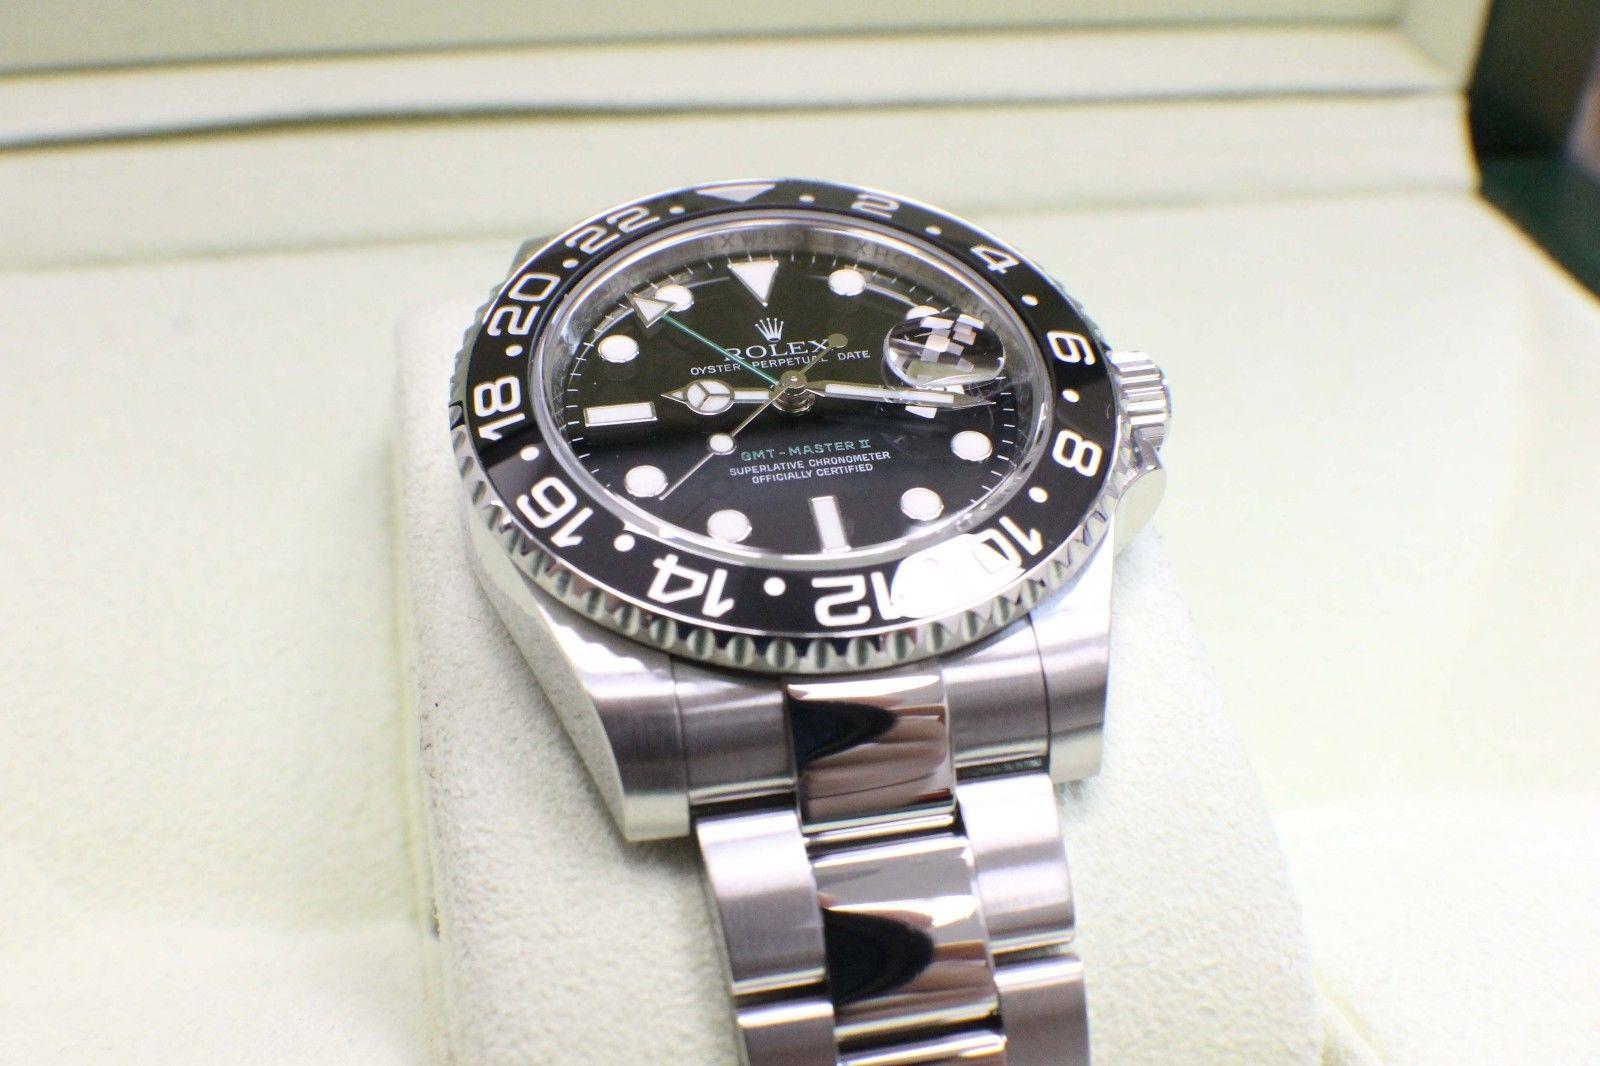 Men's Rolex GMT Master II 116710 Black Ceramic Stainless Steel with Box and Booklets